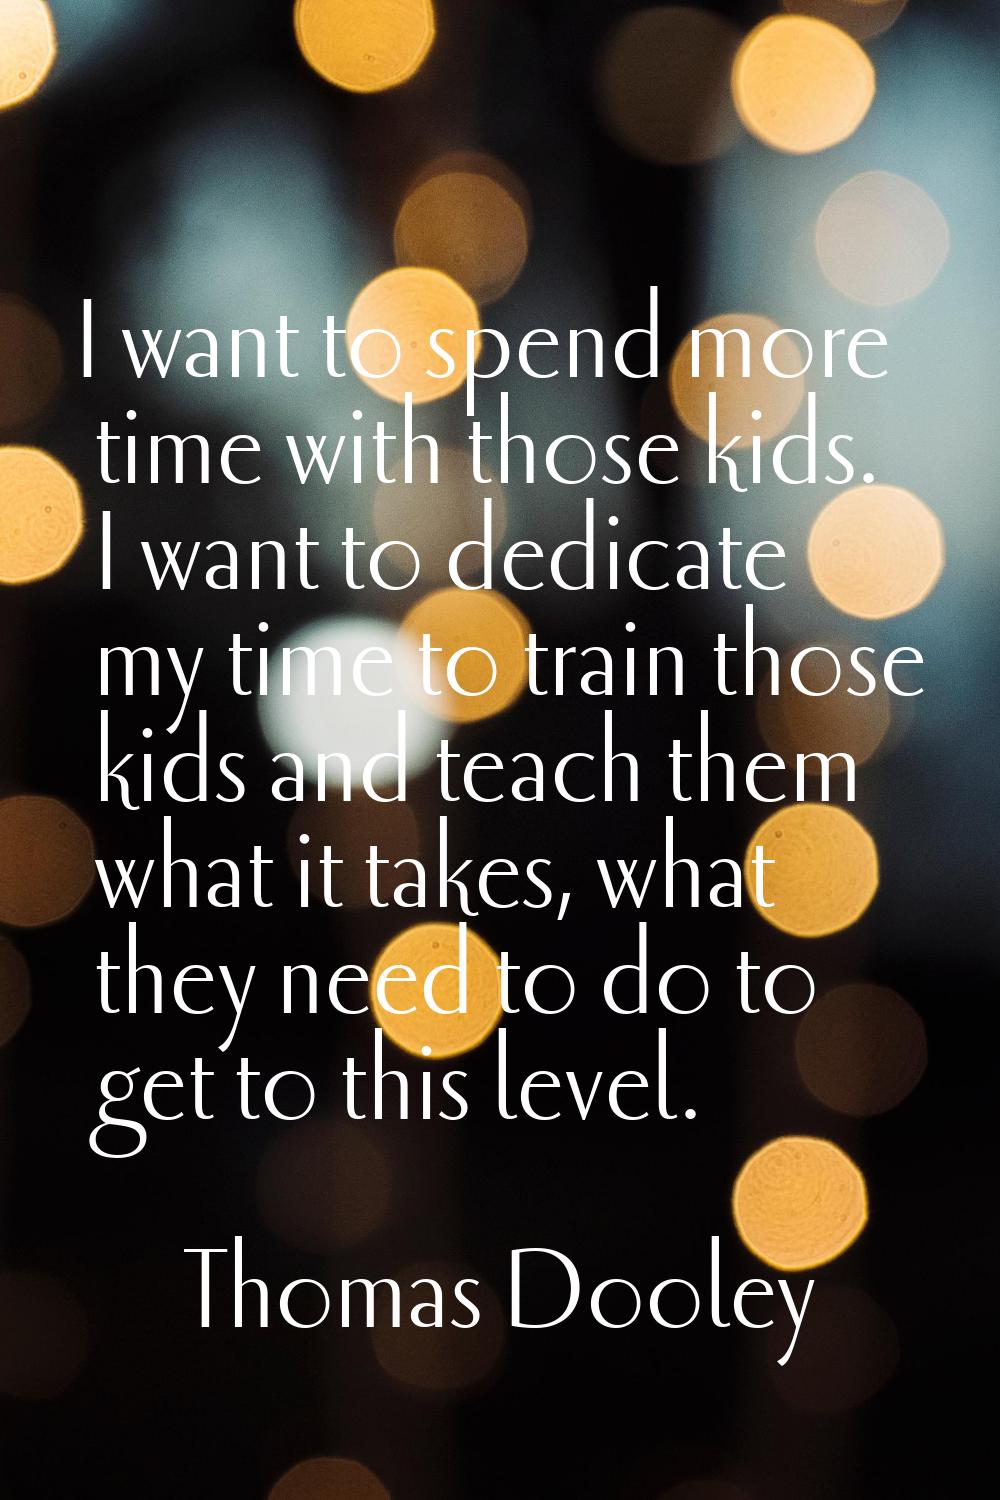 I want to spend more time with those kids. I want to dedicate my time to train those kids and teach